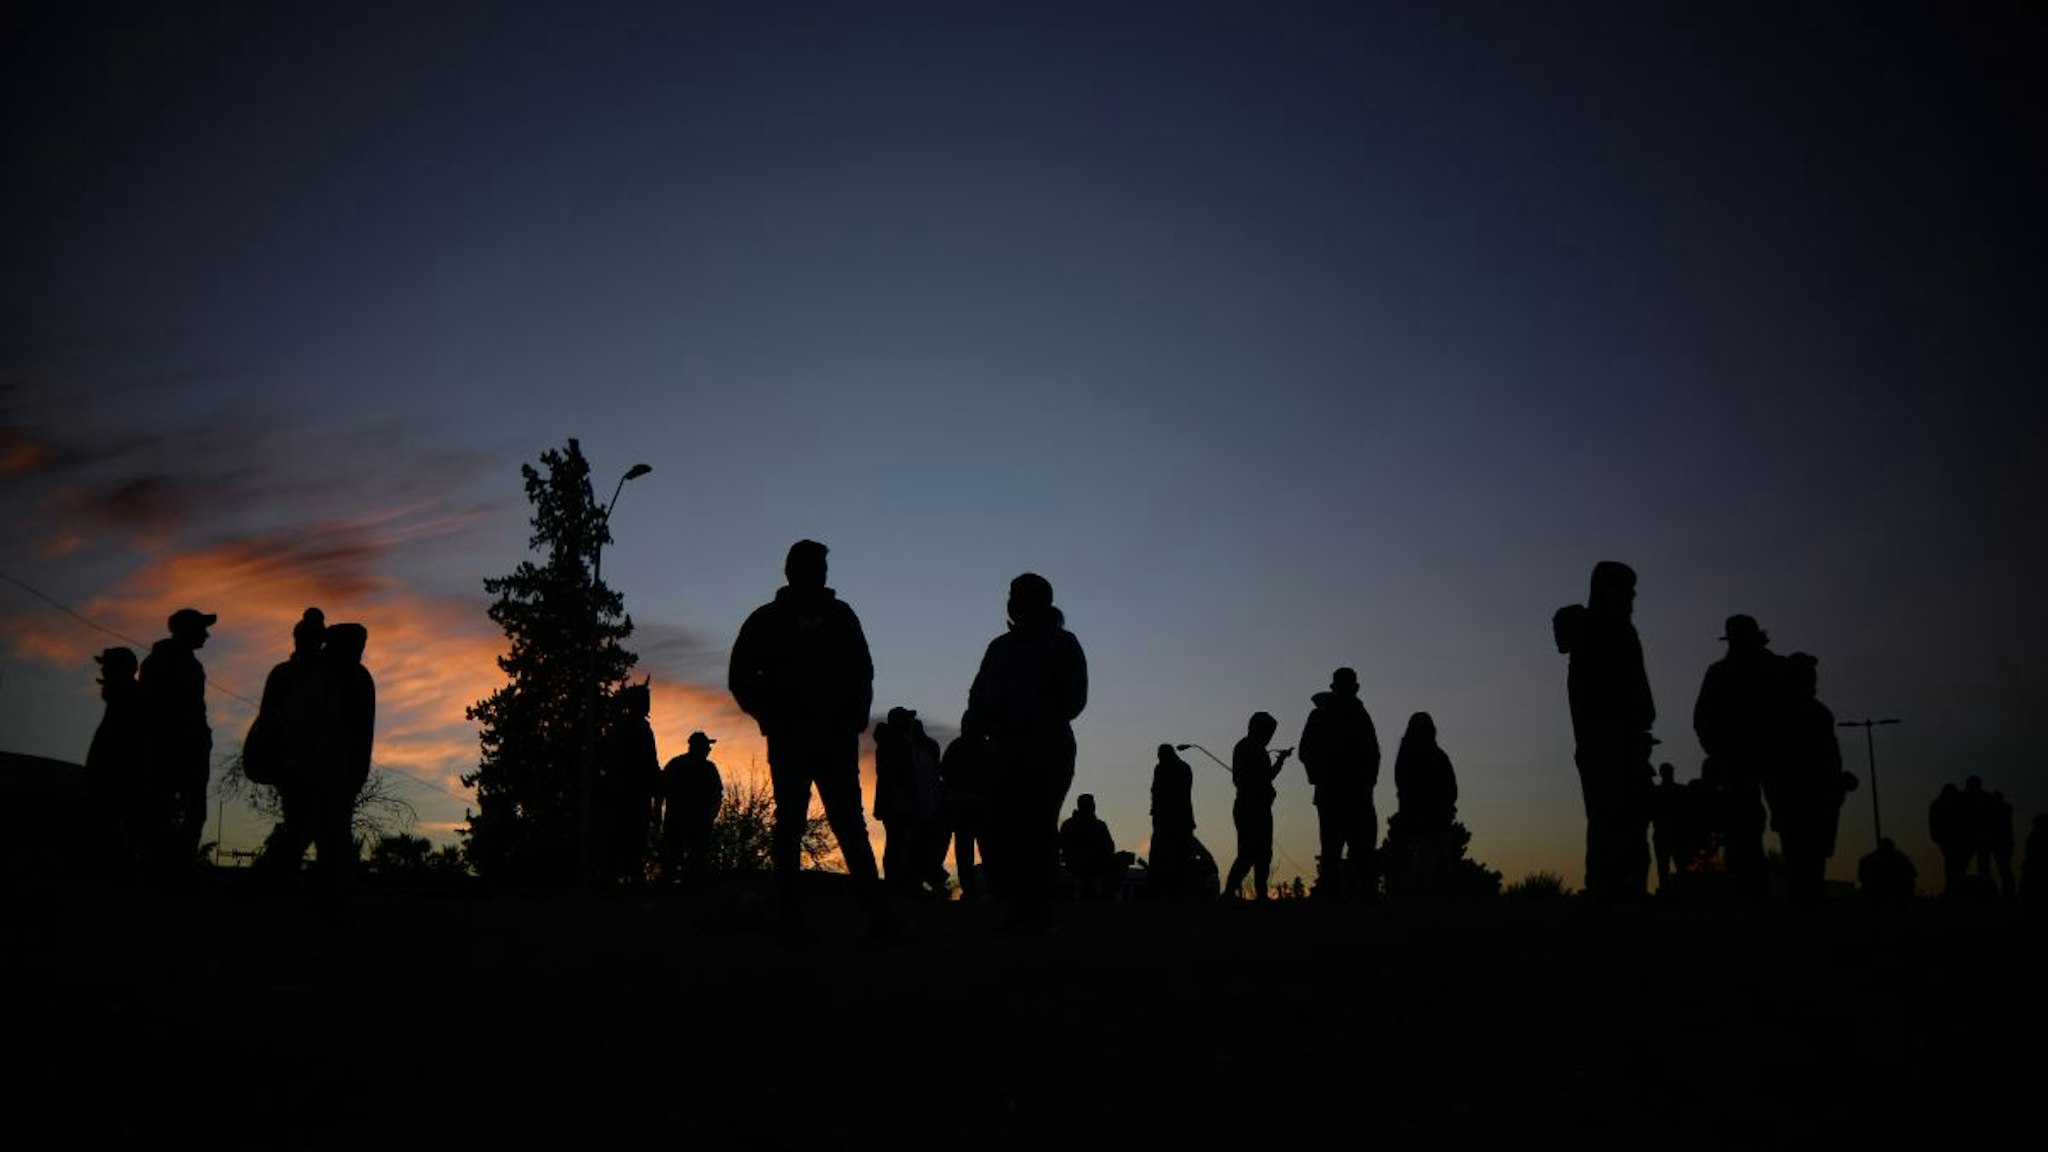 Venezuelan migrants communicate with their families and friends at the camp area in front of the US Border Patrol operations post across the Rio Bravo River in the evening hours in Mexico on November 14, 2022.